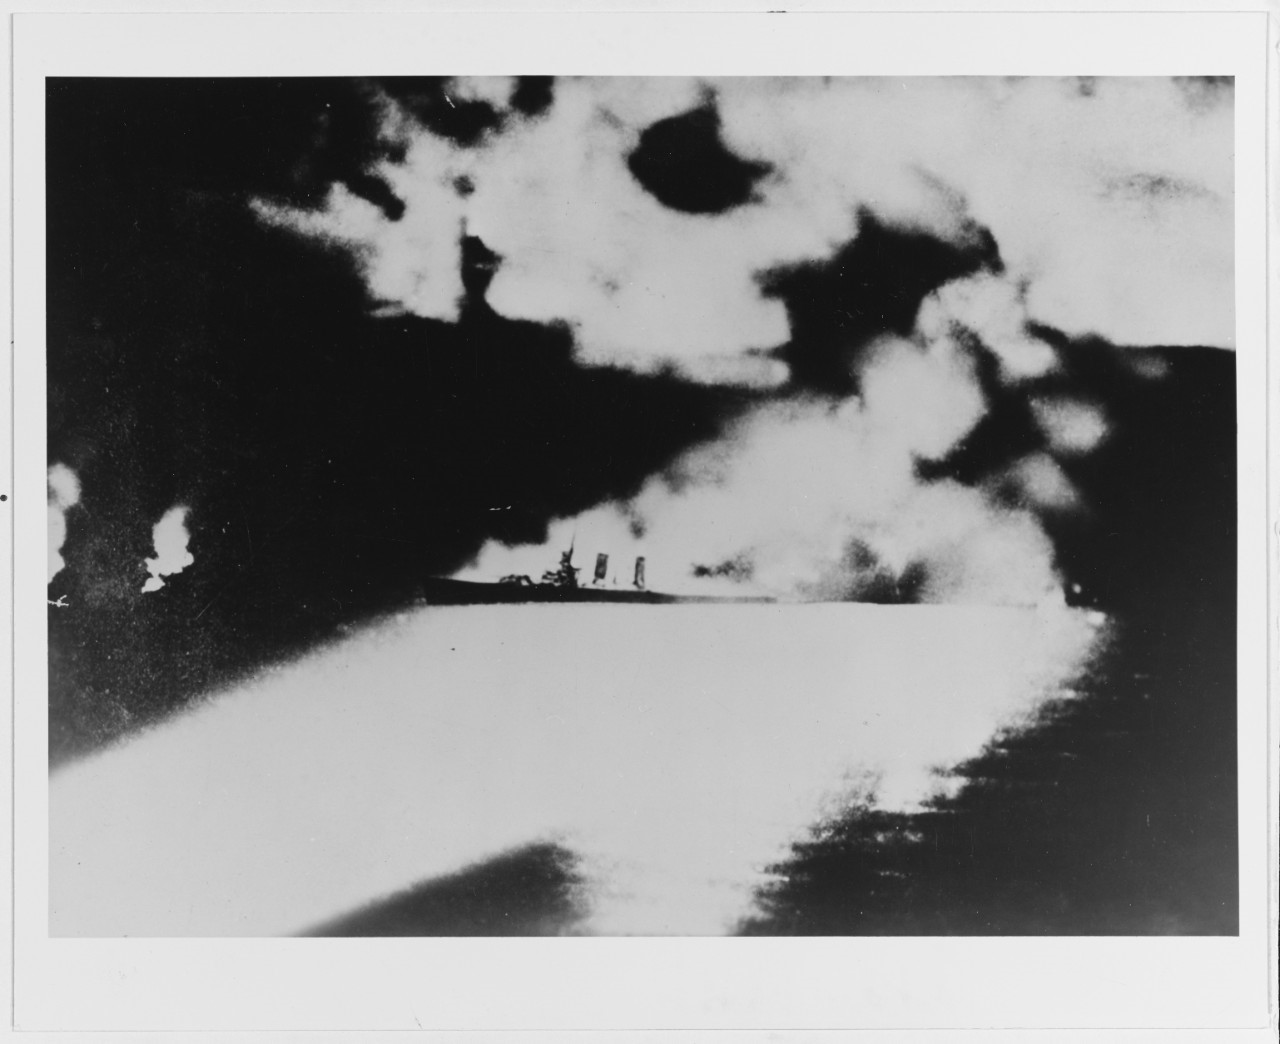 USS Quincy (CA-39) at the Battle of Savo Island.